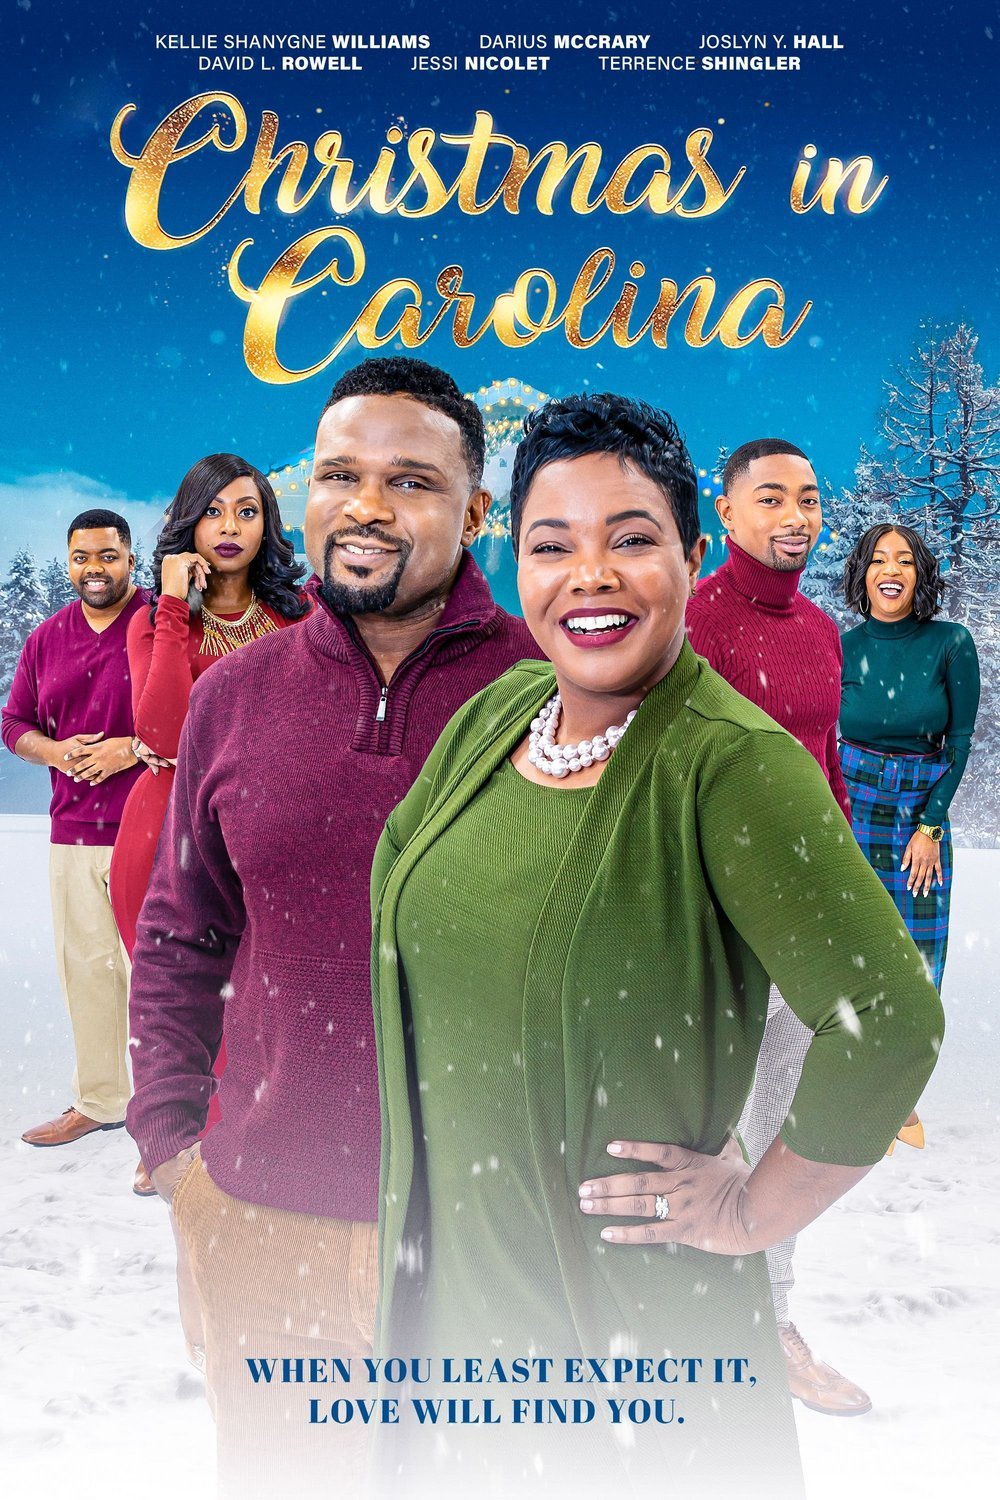 Poster of the movie Christmas in Carolina